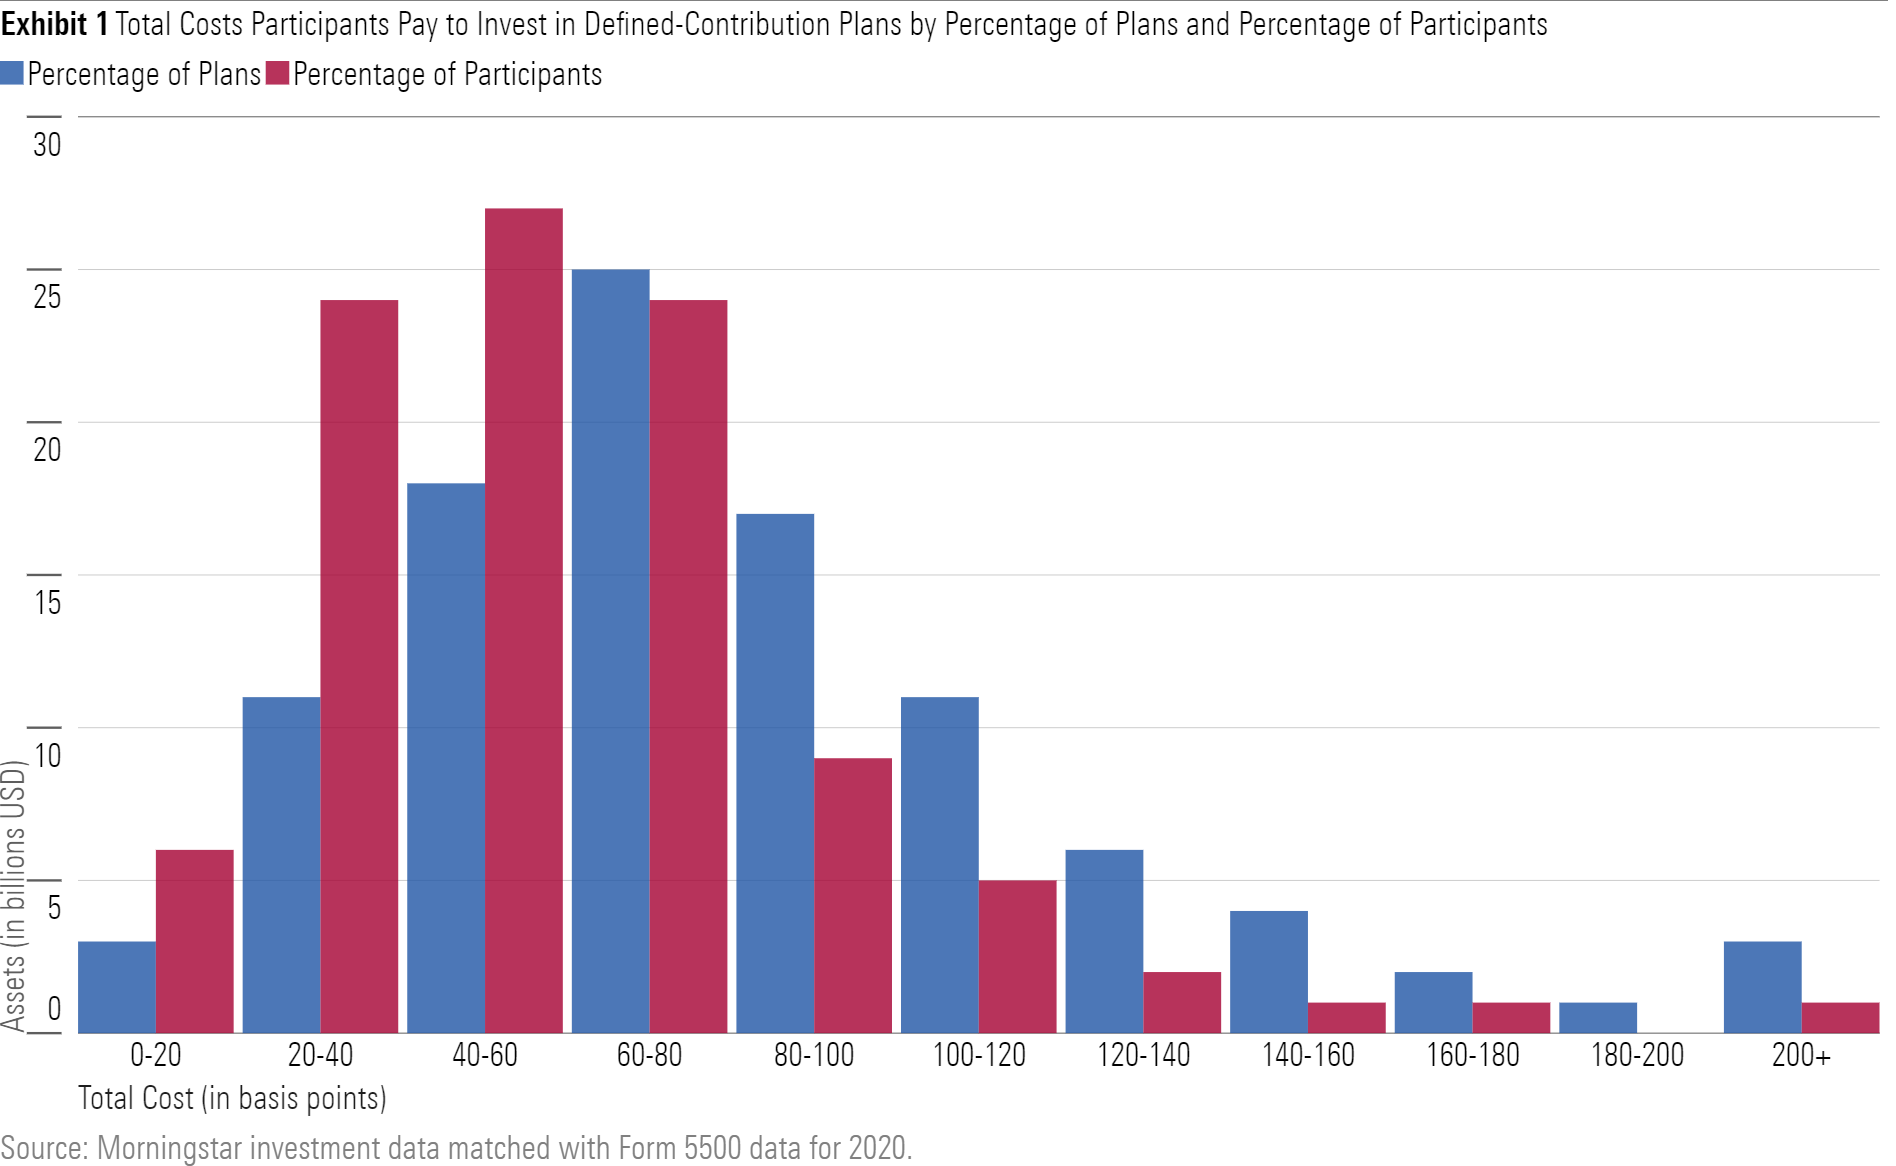 Bar chart showing the distribution of costs among defined-contribution plans by percentage of plans and percentage of participants.